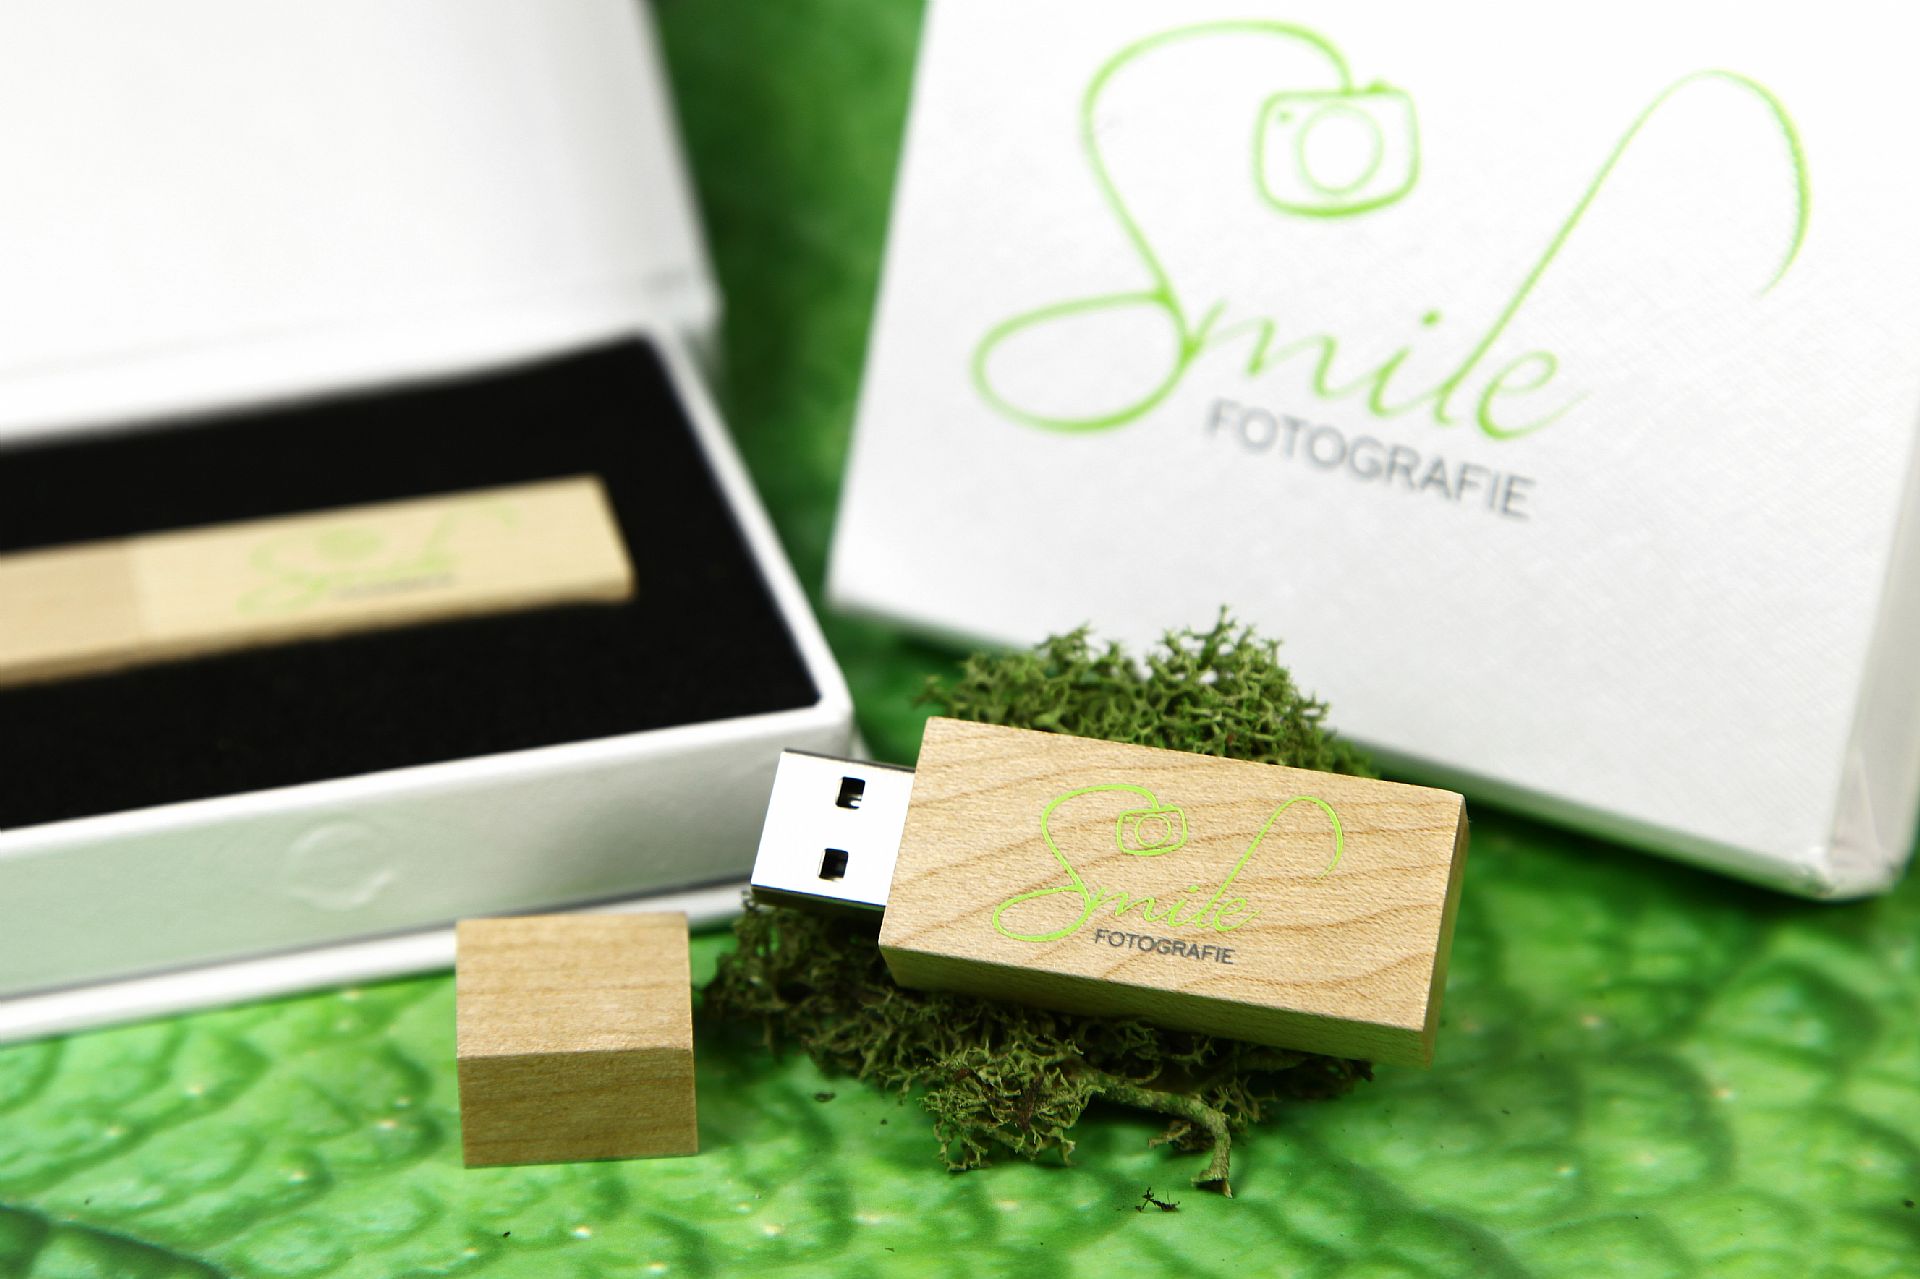 usb stick verpackung holz hell natur edel werbung